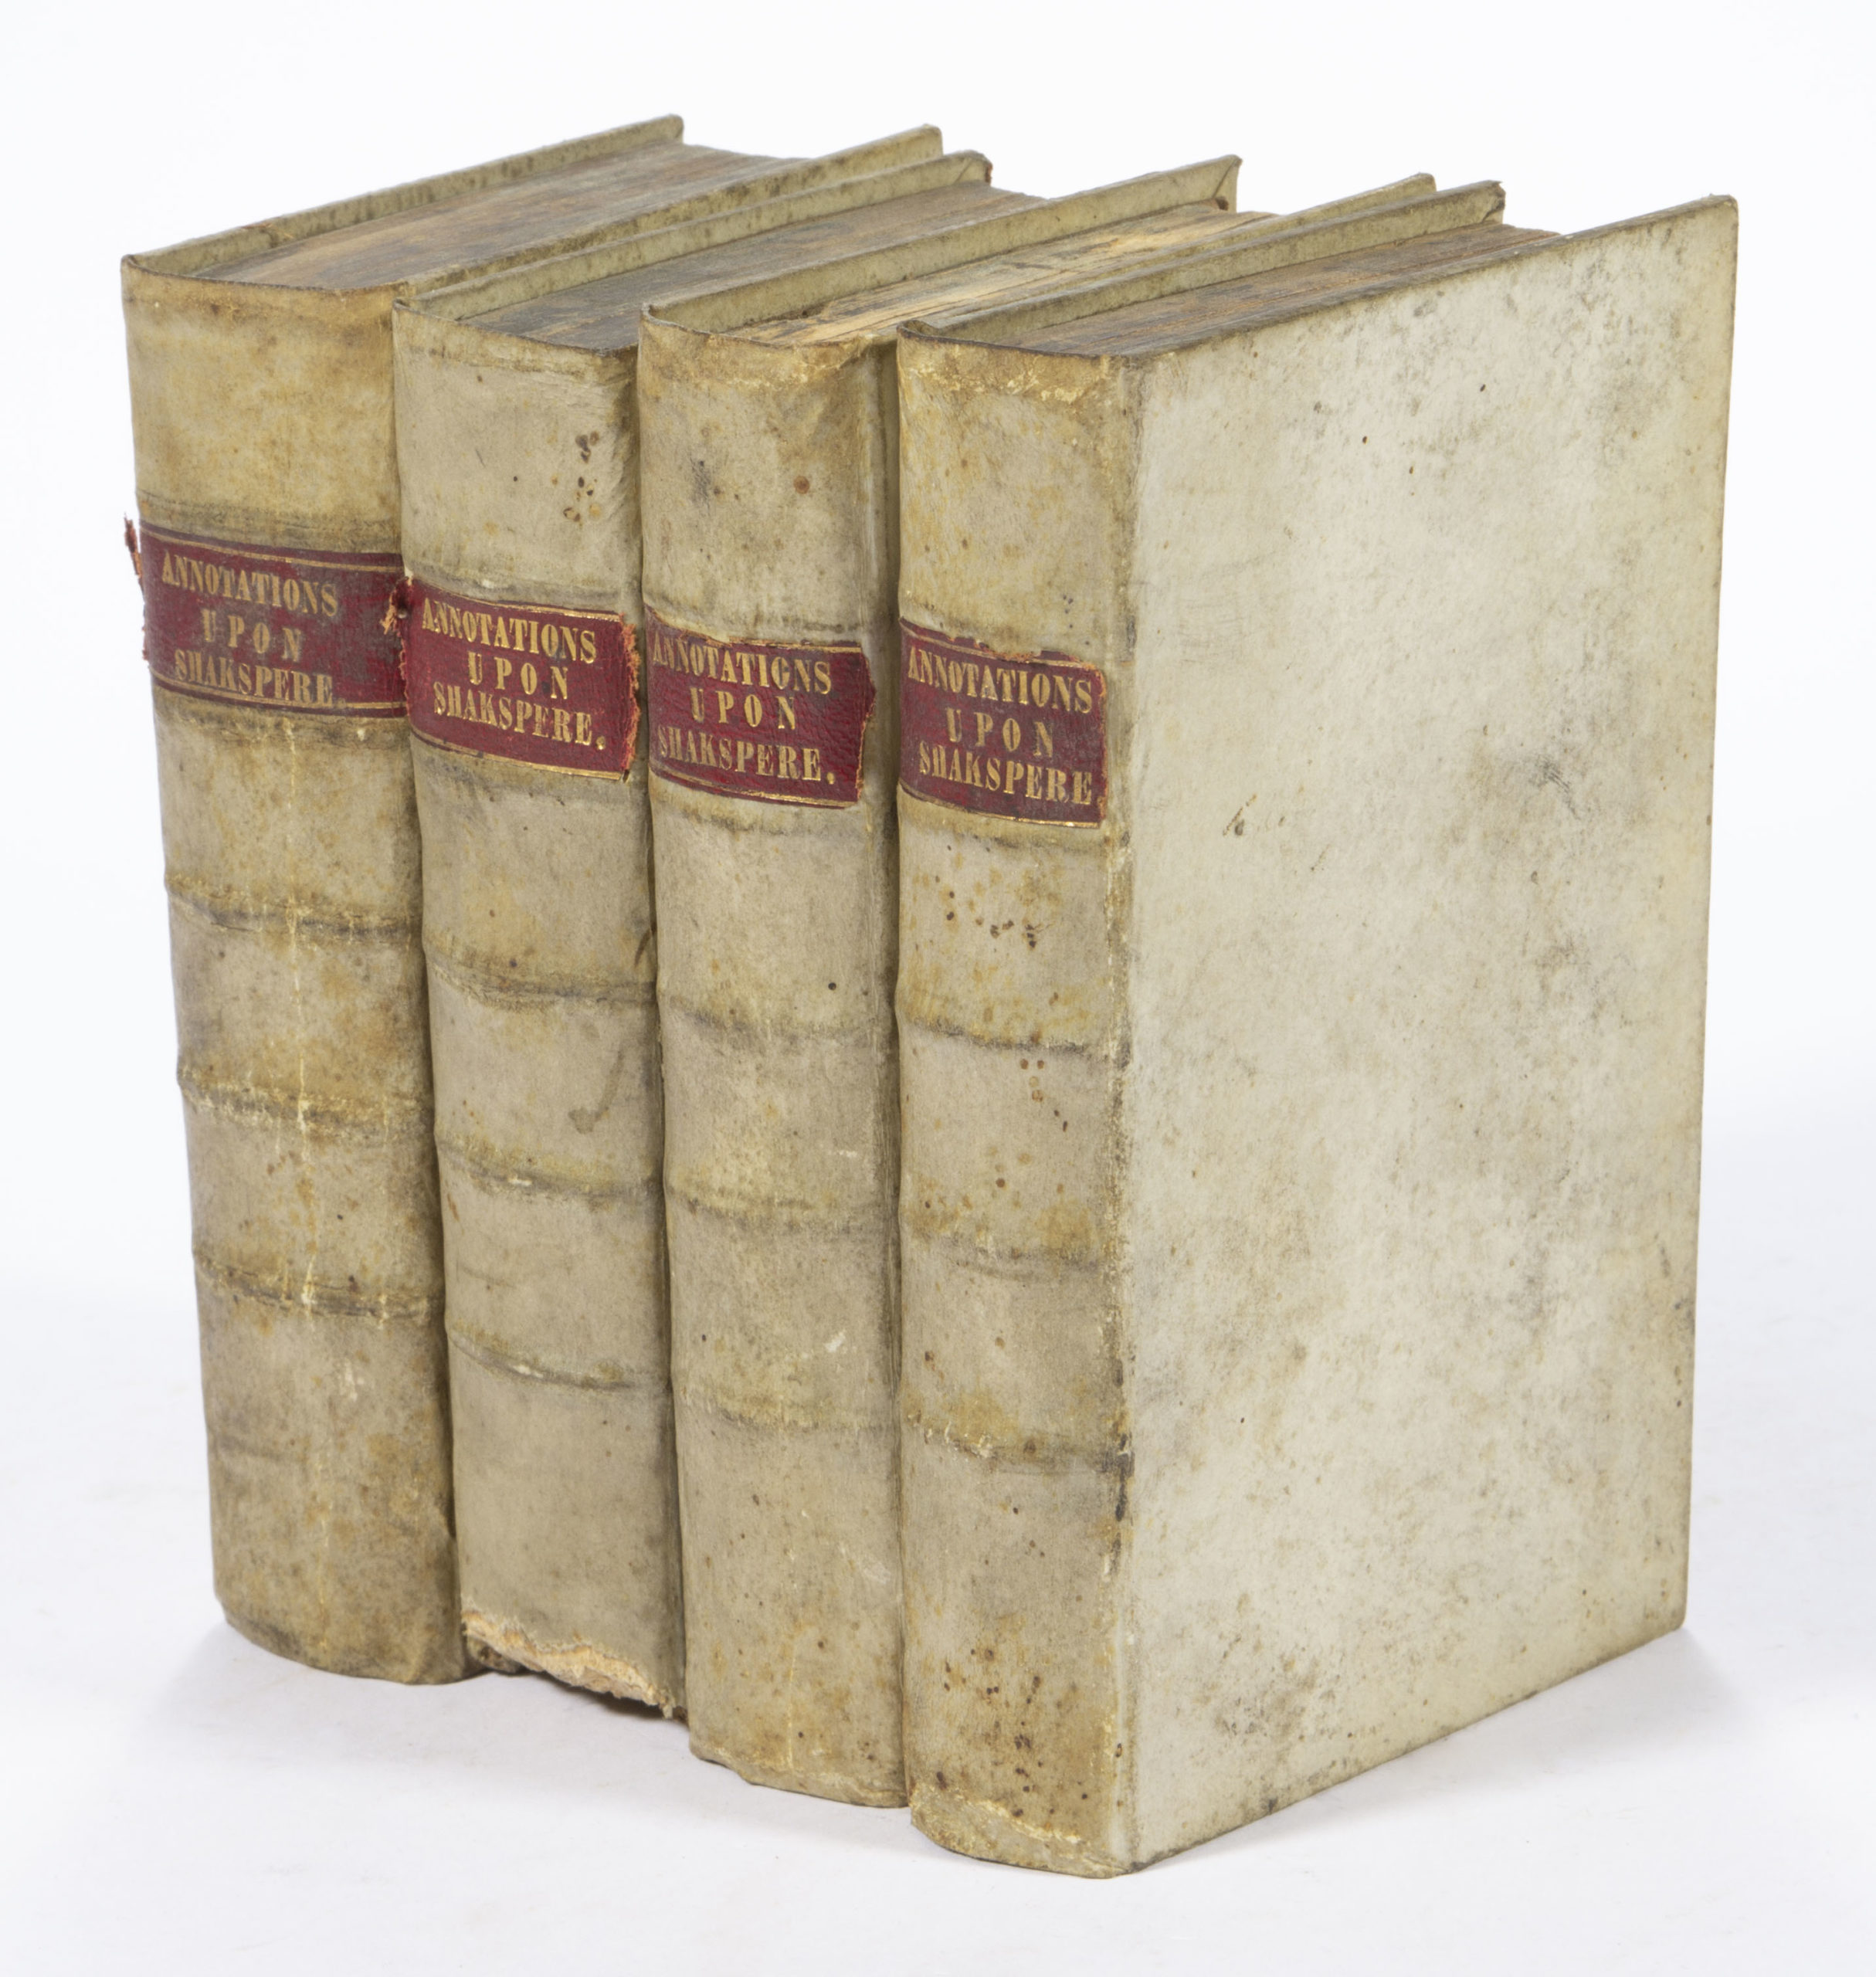 ANTIQUARIAN ANNOTATIONS UPON SHAKESPEARE VOLUMES, SET OF FOUR,